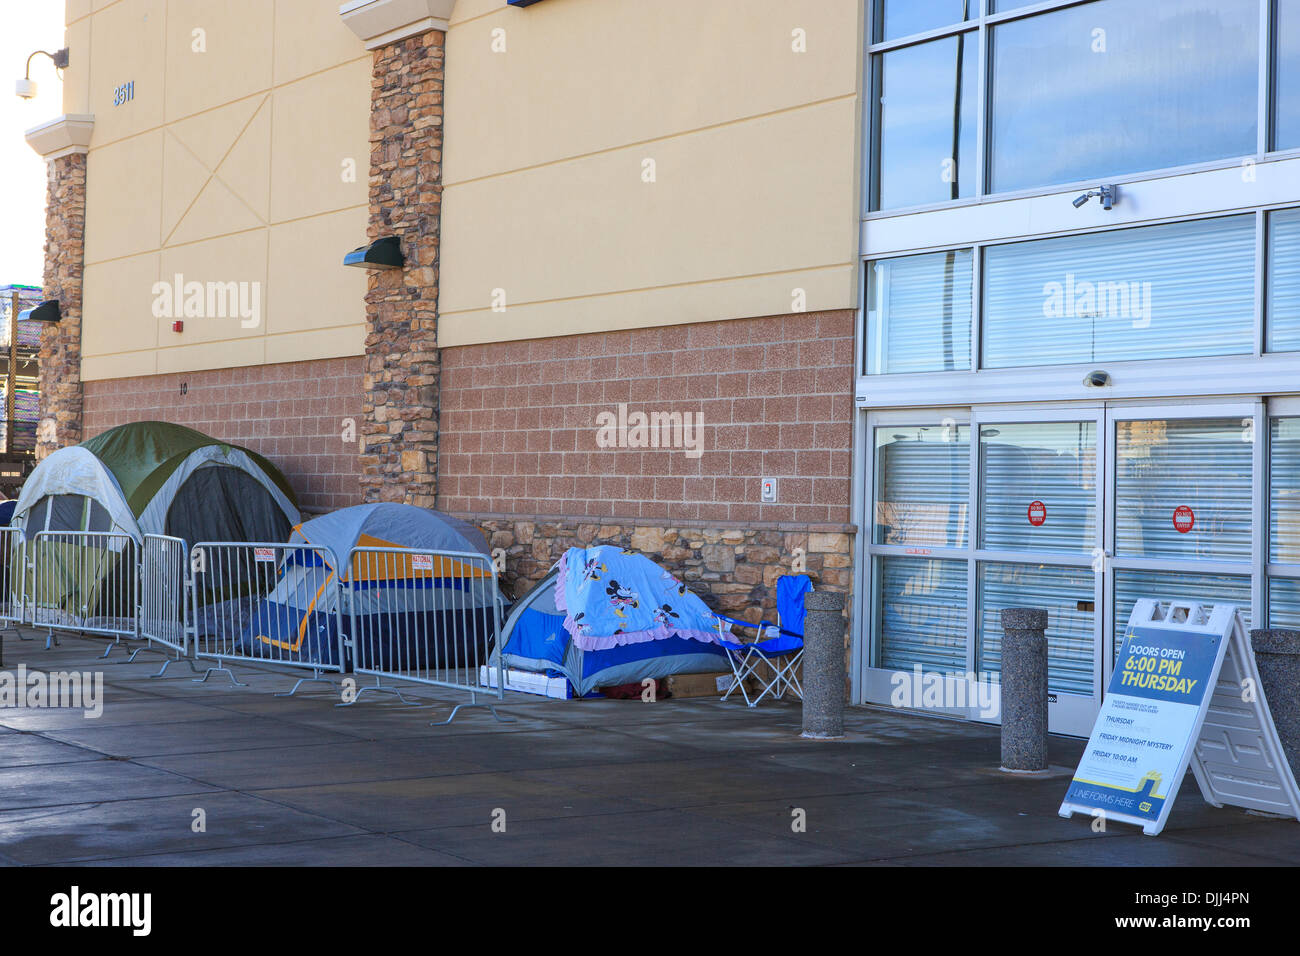 Aurora, Colorado USA – 28 November 2013. Christmas holiday shoppers sleep in their tents early on Thanksgiving morning to hold their spot in line for Black Friday deals at a Best Buy electronics store.  The store is scheduled to open at 6:00pm the day of Thanksgiving. Credit:  Ed Endicott/Alamy Live News Stock Photo